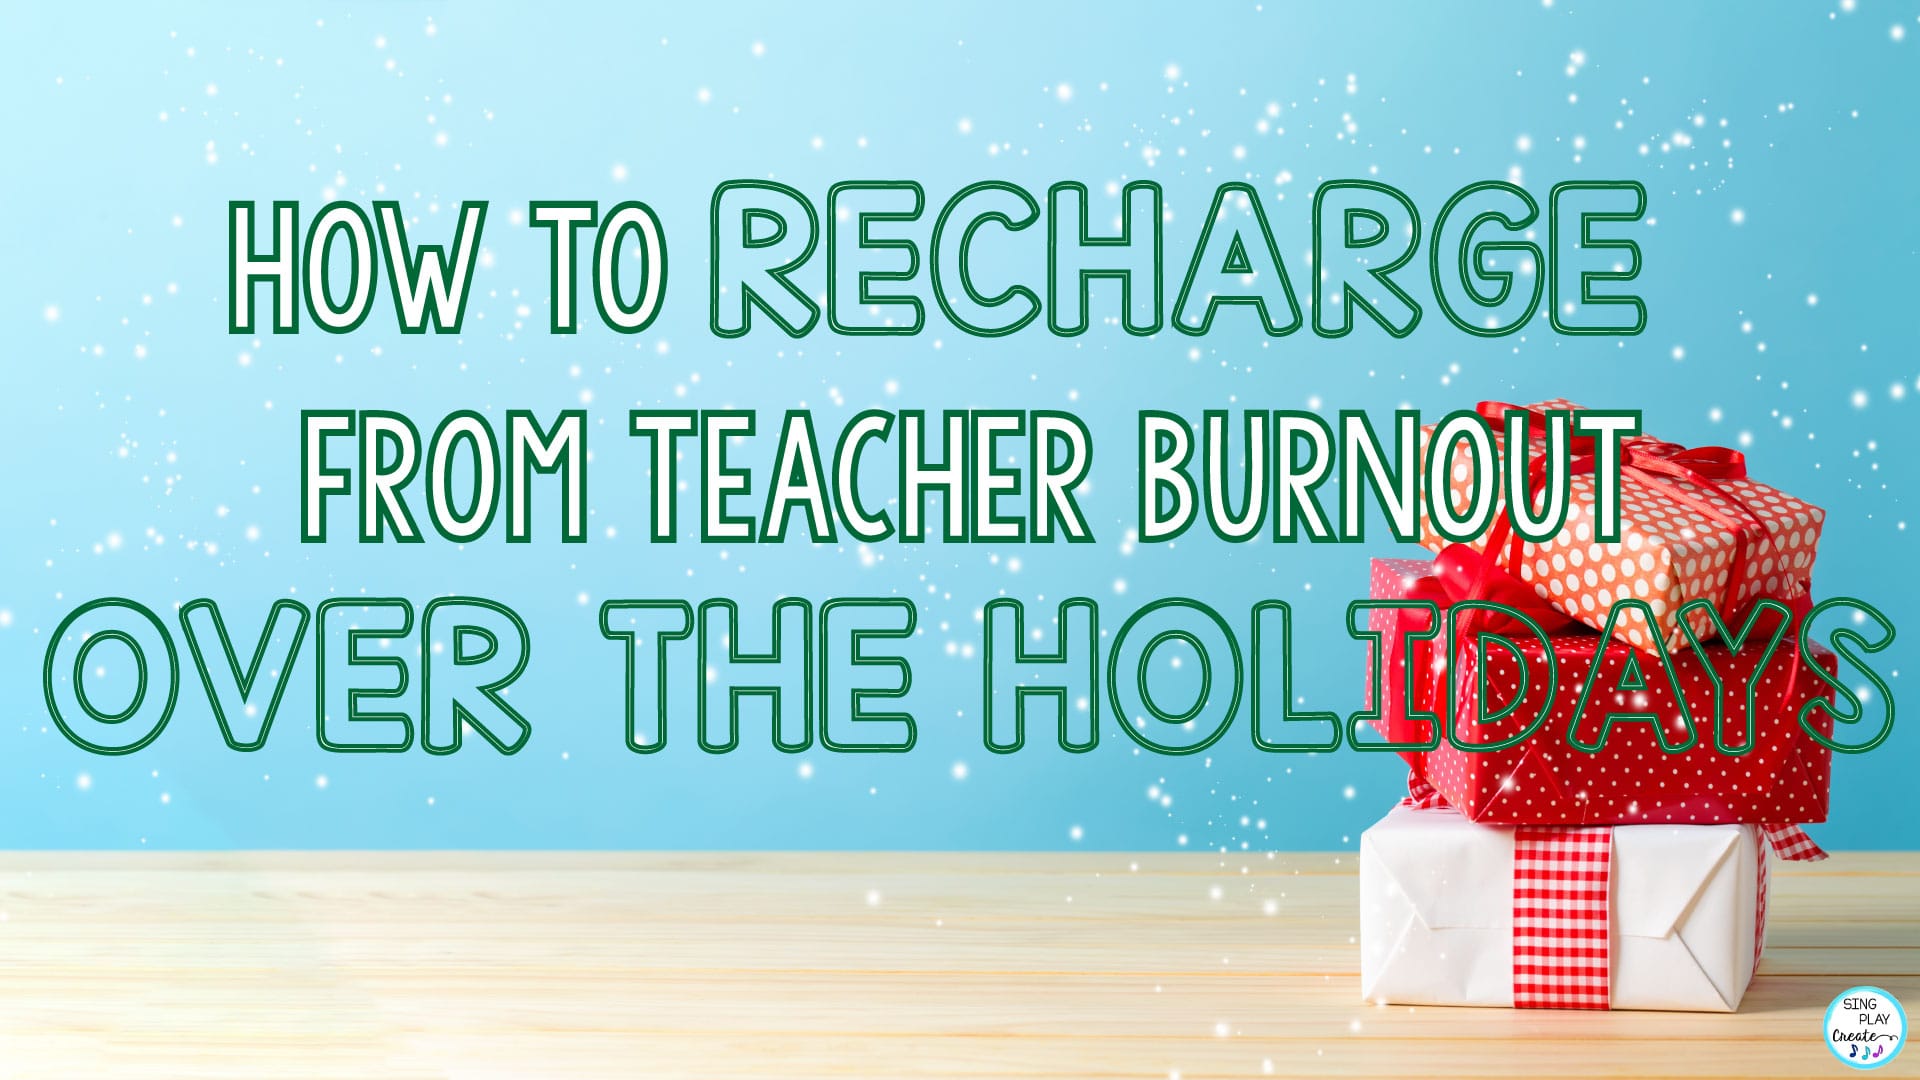 You are currently viewing How to Recharge from Teacher Burnout Over the Holidays